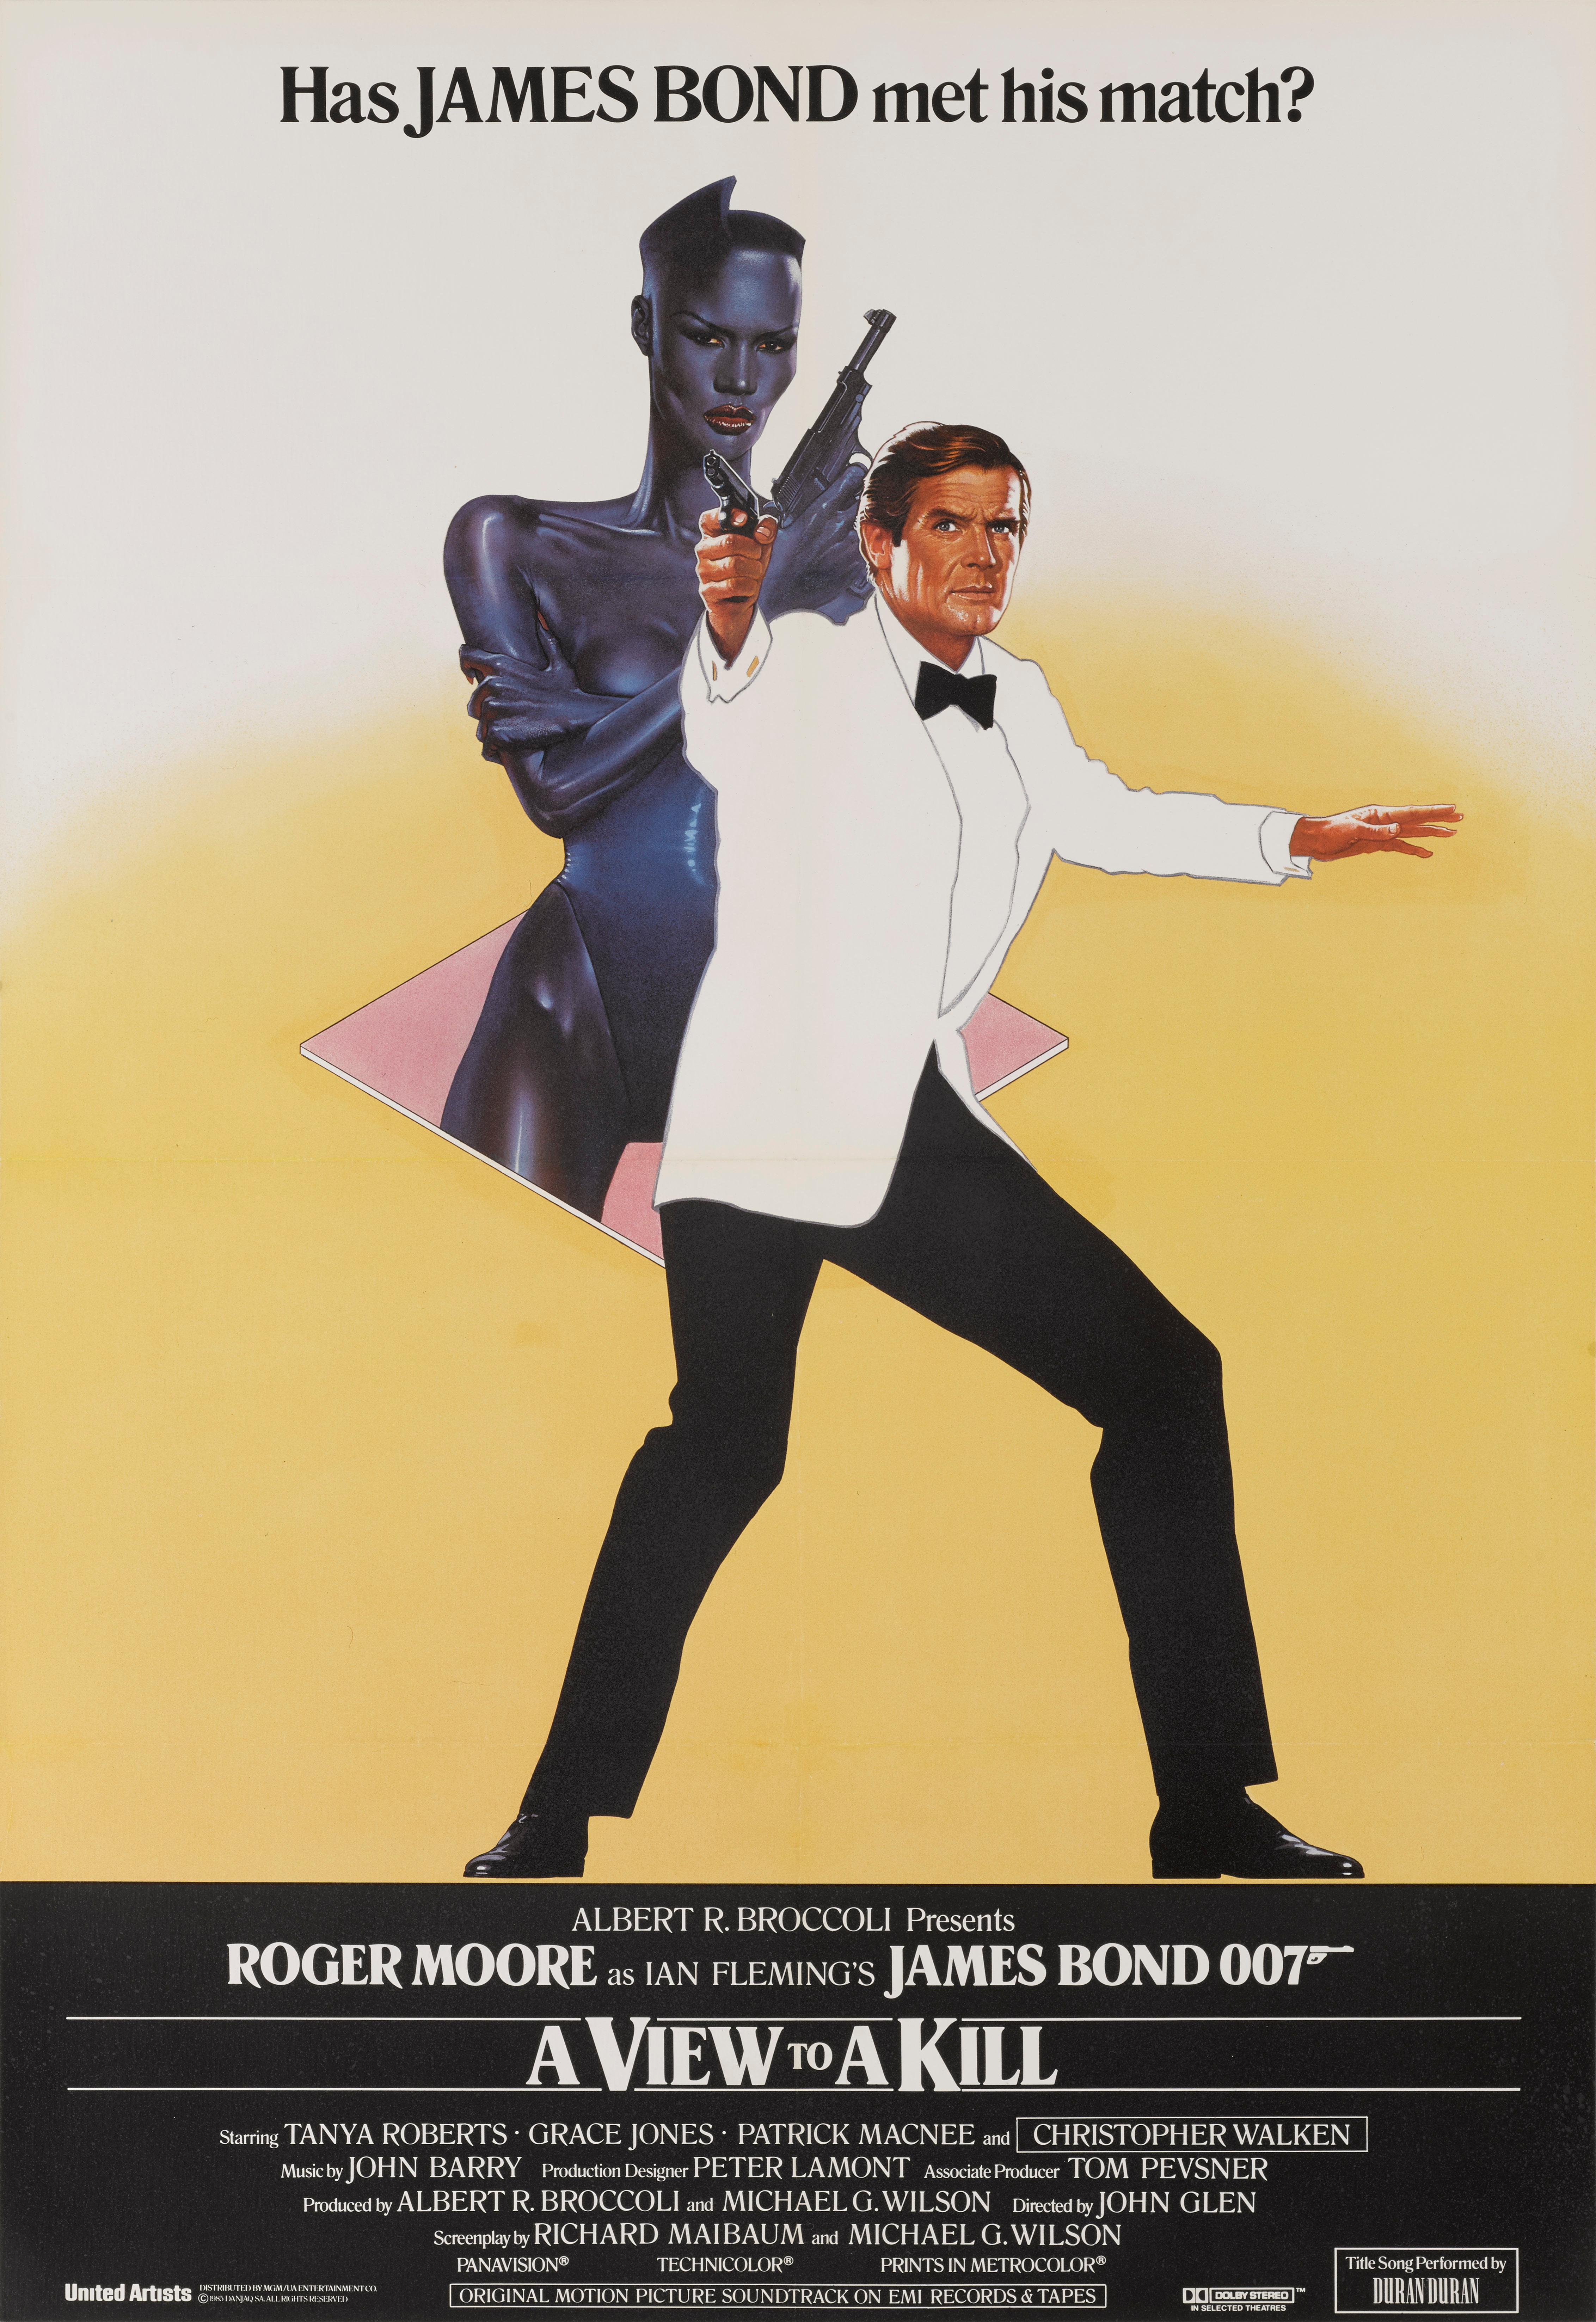 Original British film poster for A View to a Kill (1985) the fifteenth Bond film, and the seventh and last Bond film to star Roger Moore, and last to star Lois Maxwell as Miss Moneypenny. The film was the third Bond feature to be directed by John